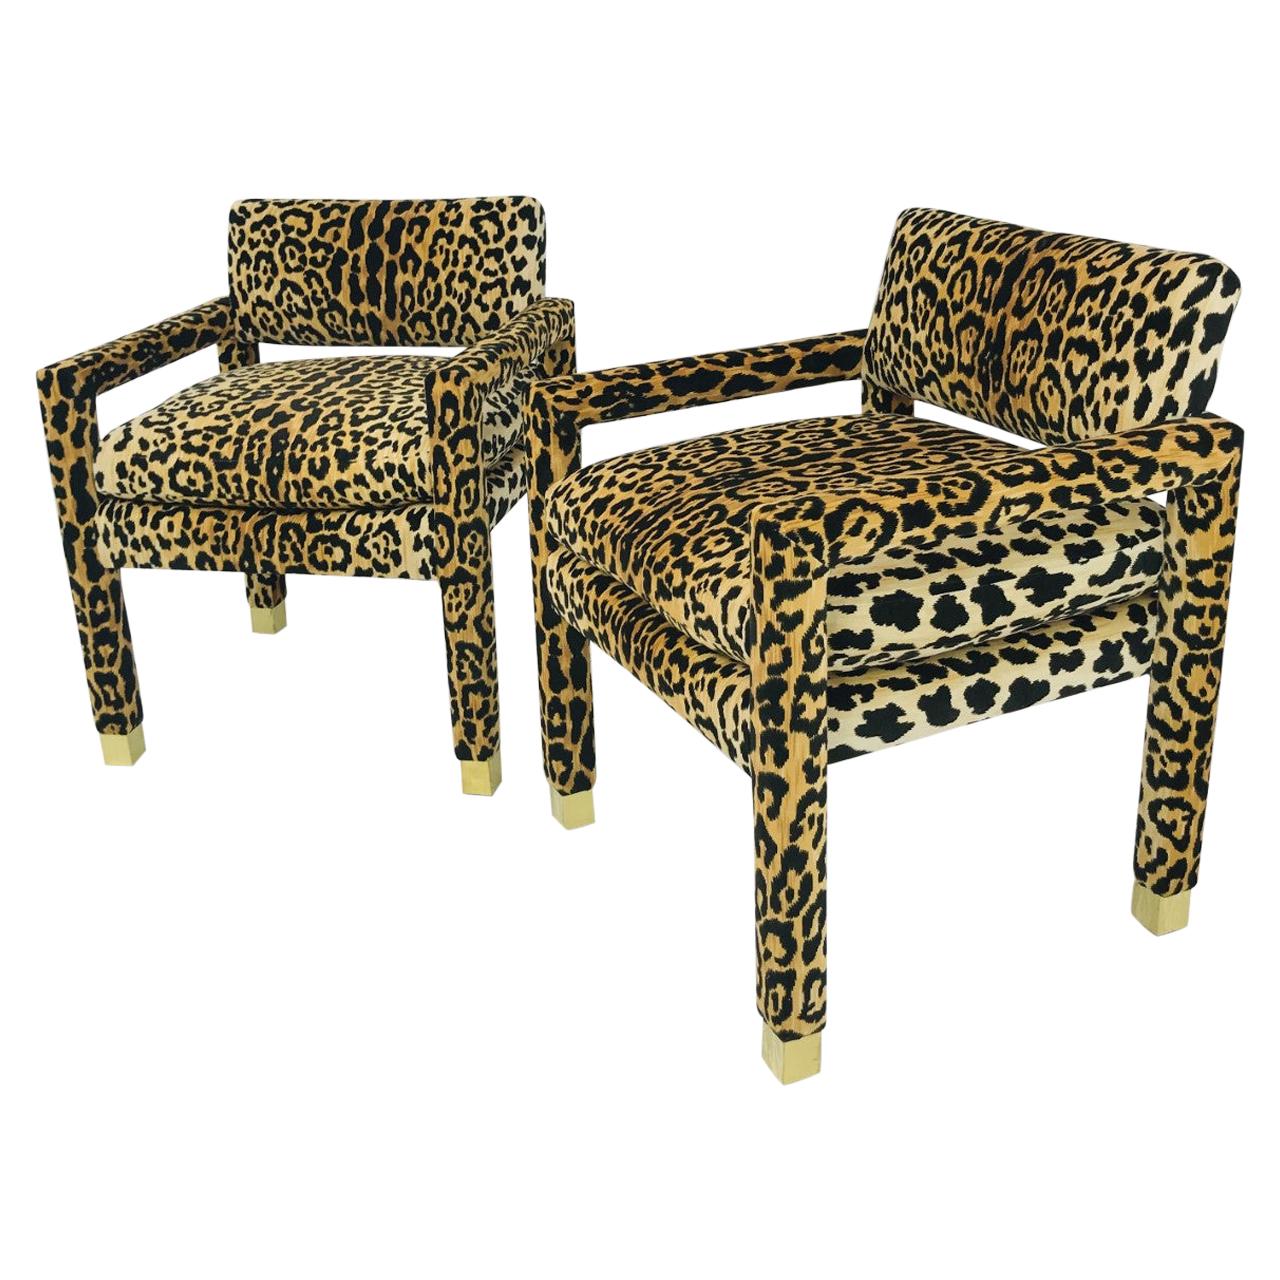 Pair of Milo Baughman Leopard Parsons Chairs with Brass Sabots